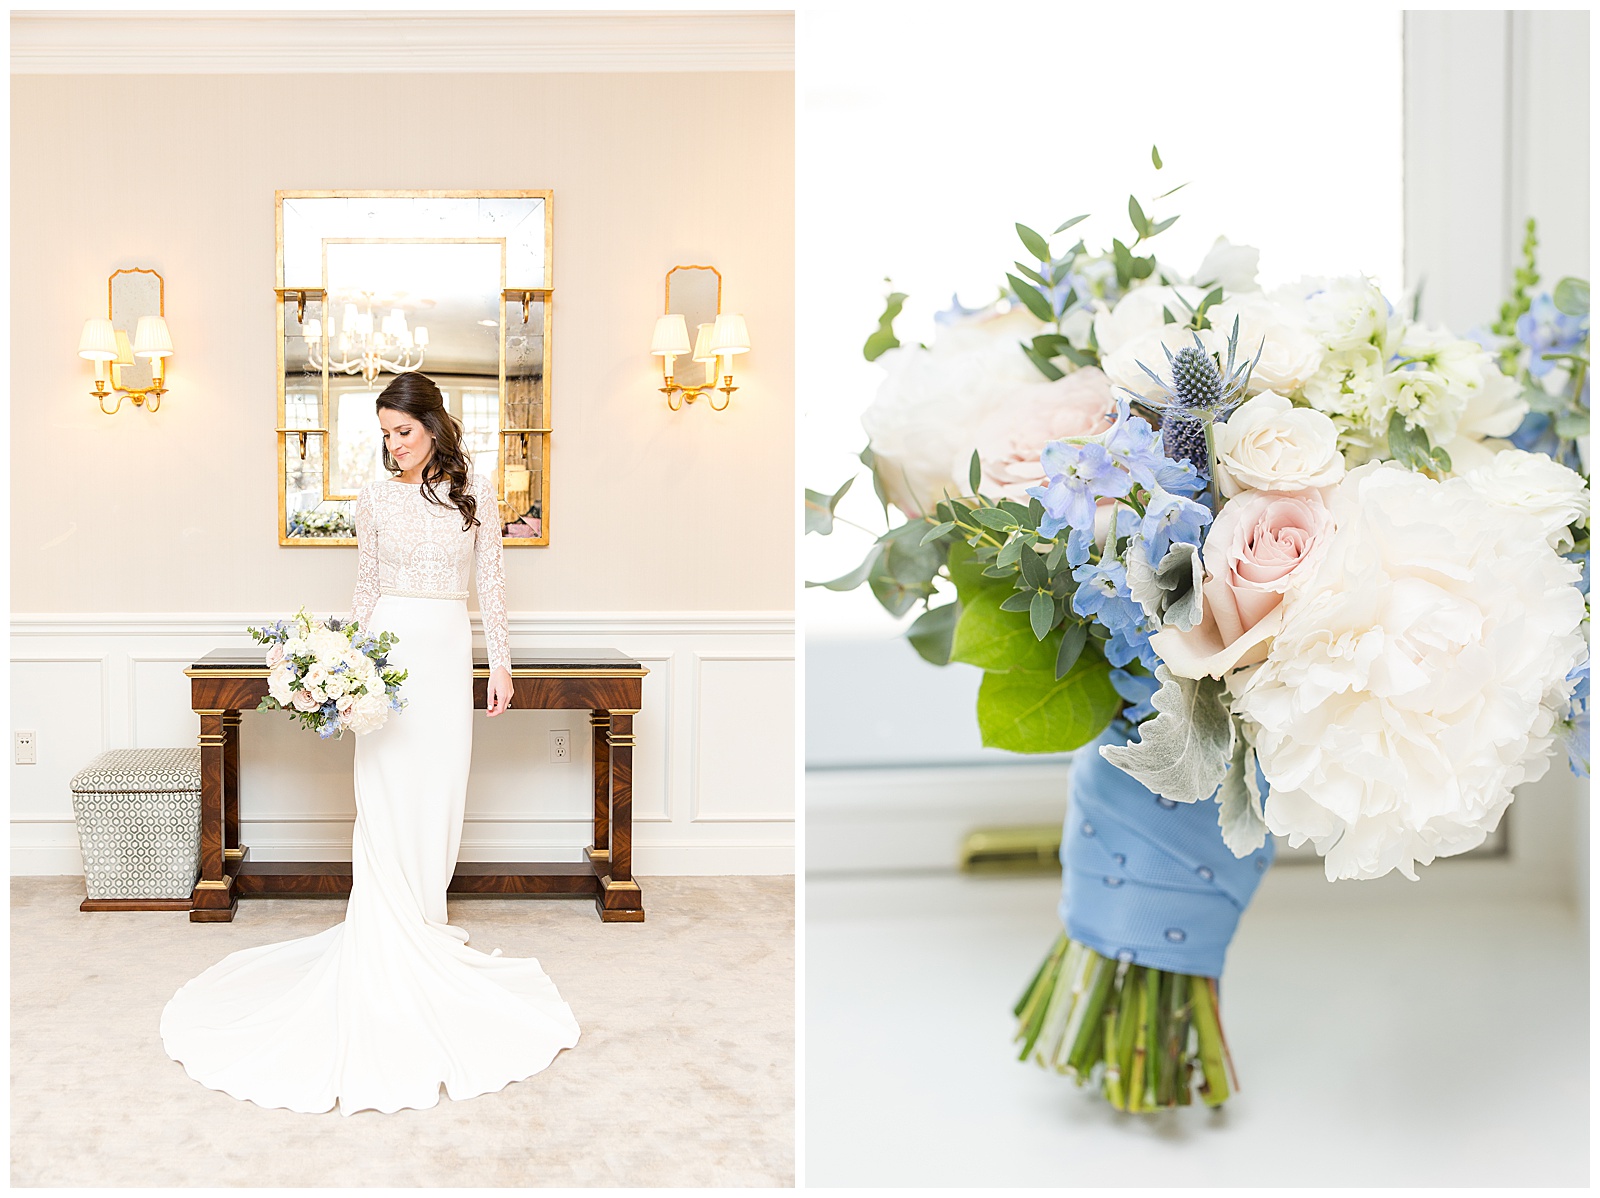 Bridal portraits in the bridal suite at Brae Burn Country Club